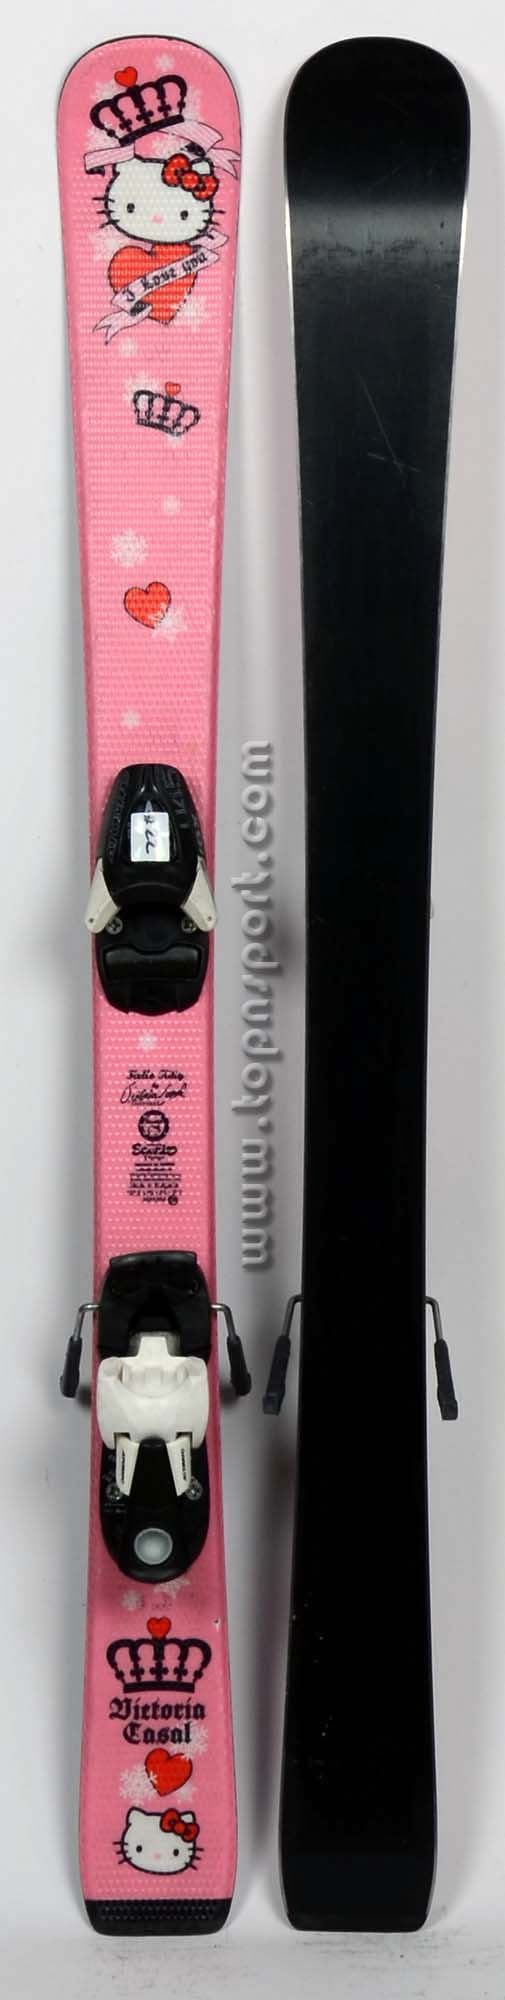 Atomic HELLO KITTY Girly - Skis d'occasion Junior